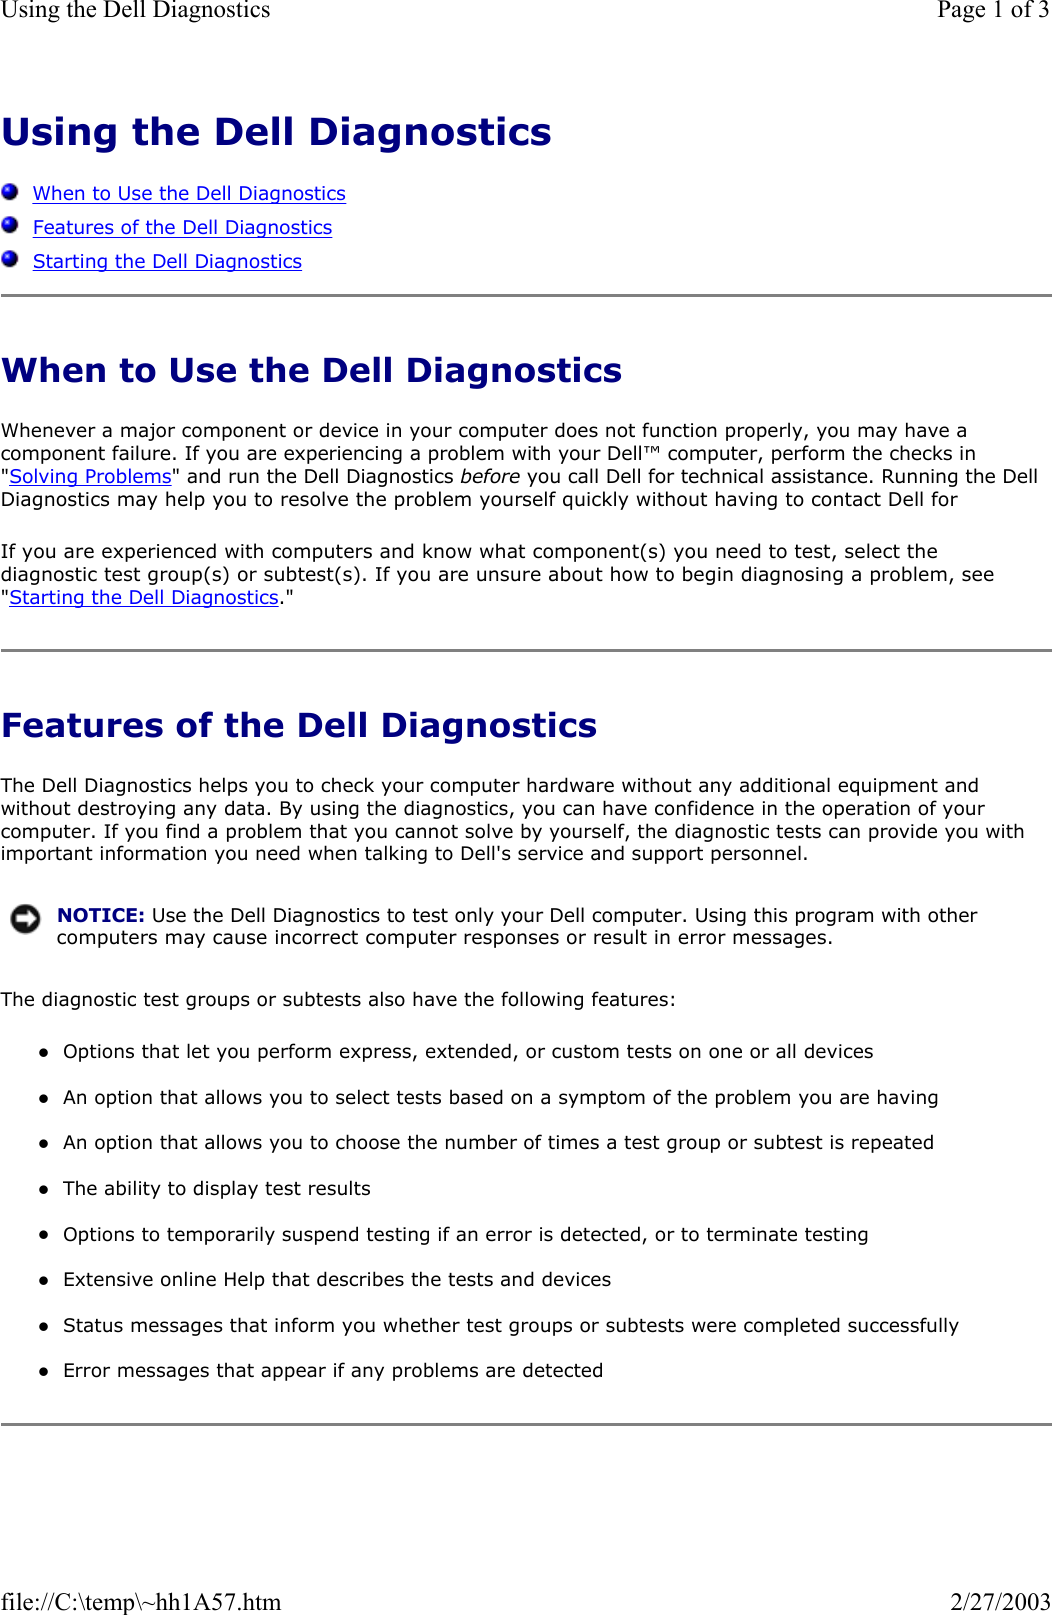 Using the Dell Diagnostics      When to Use the Dell Diagnostics   Features of the Dell Diagnostics   Starting the Dell Diagnostics When to Use the Dell Diagnostics Whenever a major component or device in your computer does not function properly, you may have a component failure. If you are experiencing a problem with your Dell™ computer, perform the checks in &quot;Solving Problems&quot; and run the Dell Diagnostics before you call Dell for technical assistance. Running the Dell Diagnostics may help you to resolve the problem yourself quickly without having to contact Dell for If you are experienced with computers and know what component(s) you need to test, select the diagnostic test group(s) or subtest(s). If you are unsure about how to begin diagnosing a problem, see &quot;Starting the Dell Diagnostics.&quot; Features of the Dell Diagnostics The Dell Diagnostics helps you to check your computer hardware without any additional equipment and without destroying any data. By using the diagnostics, you can have confidence in the operation of your computer. If you find a problem that you cannot solve by yourself, the diagnostic tests can provide you with important information you need when talking to Dell&apos;s service and support personnel. The diagnostic test groups or subtests also have the following features: zOptions that let you perform express, extended, or custom tests on one or all devices  zAn option that allows you to select tests based on a symptom of the problem you are having  zAn option that allows you to choose the number of times a test group or subtest is repeated  zThe ability to display test results  zOptions to temporarily suspend testing if an error is detected, or to terminate testing  zExtensive online Help that describes the tests and devices  zStatus messages that inform you whether test groups or subtests were completed successfully  zError messages that appear if any problems are detected  NOTICE: Use the Dell Diagnostics to test only your Dell computer. Using this program with other computers may cause incorrect computer responses or result in error messages.Page 1 of 3Using the Dell Diagnostics2/27/2003file://C:\temp\~hh1A57.htm